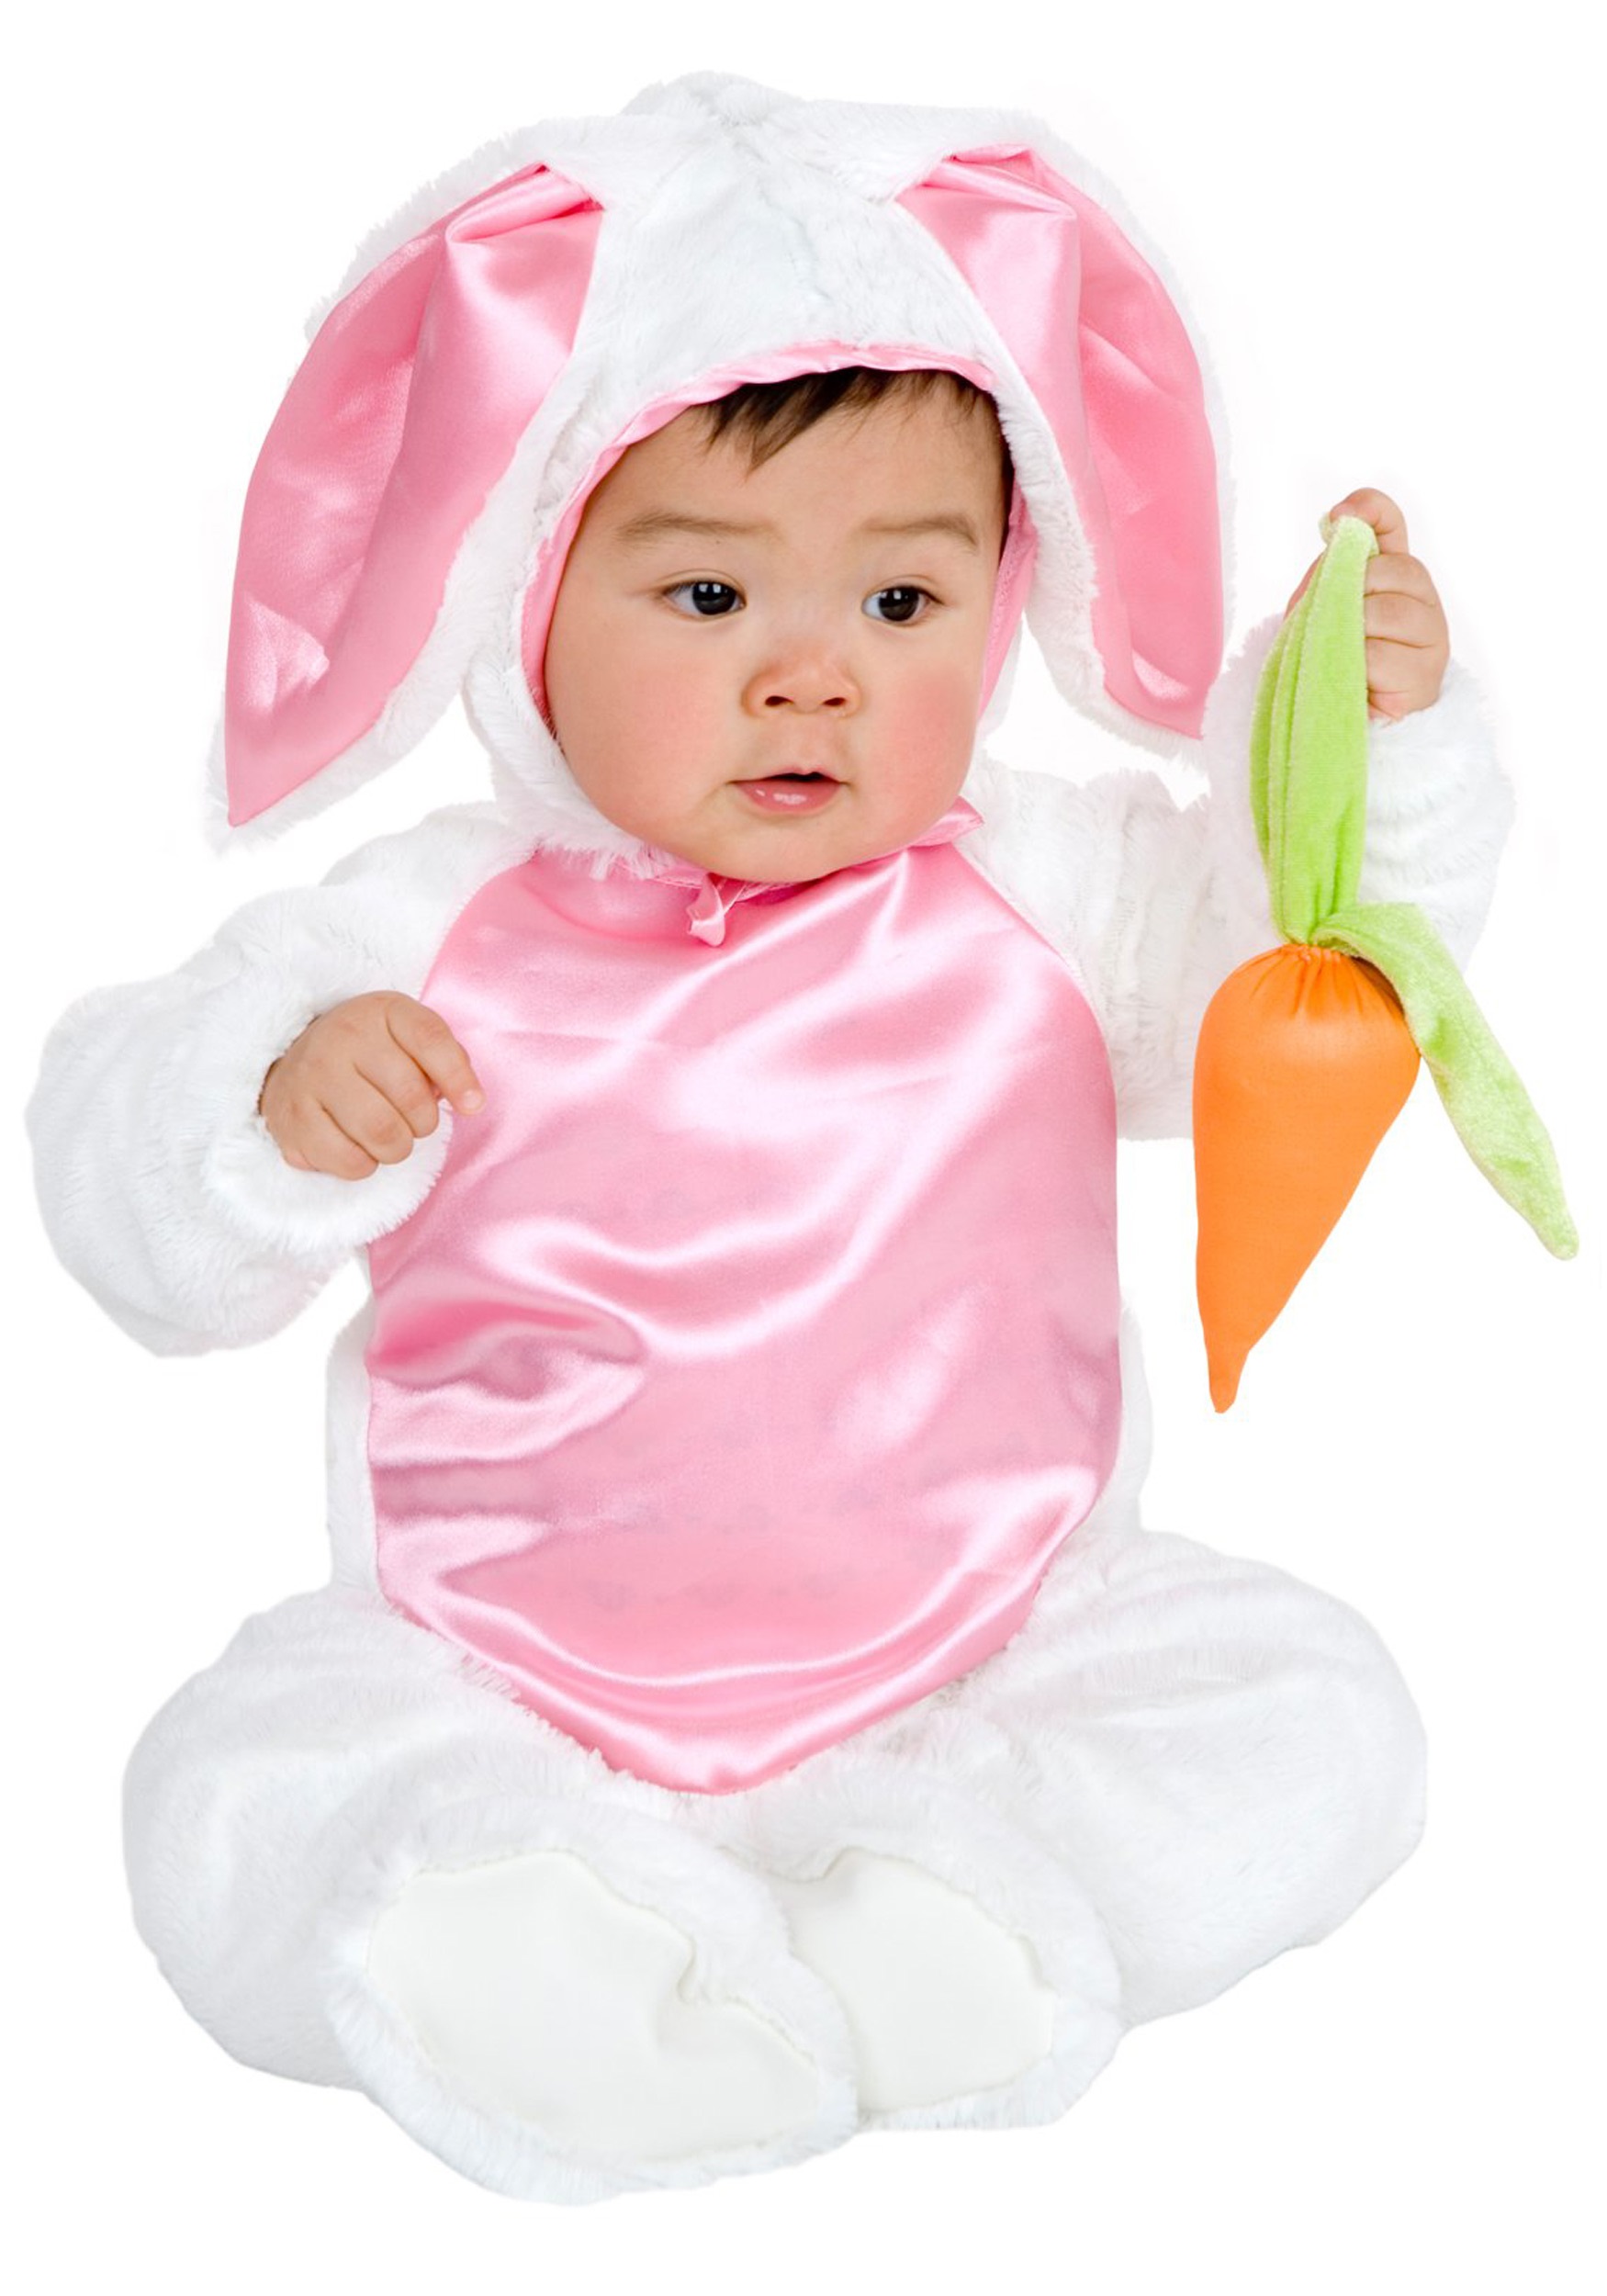 Bunny Costume for Infant / Toddler